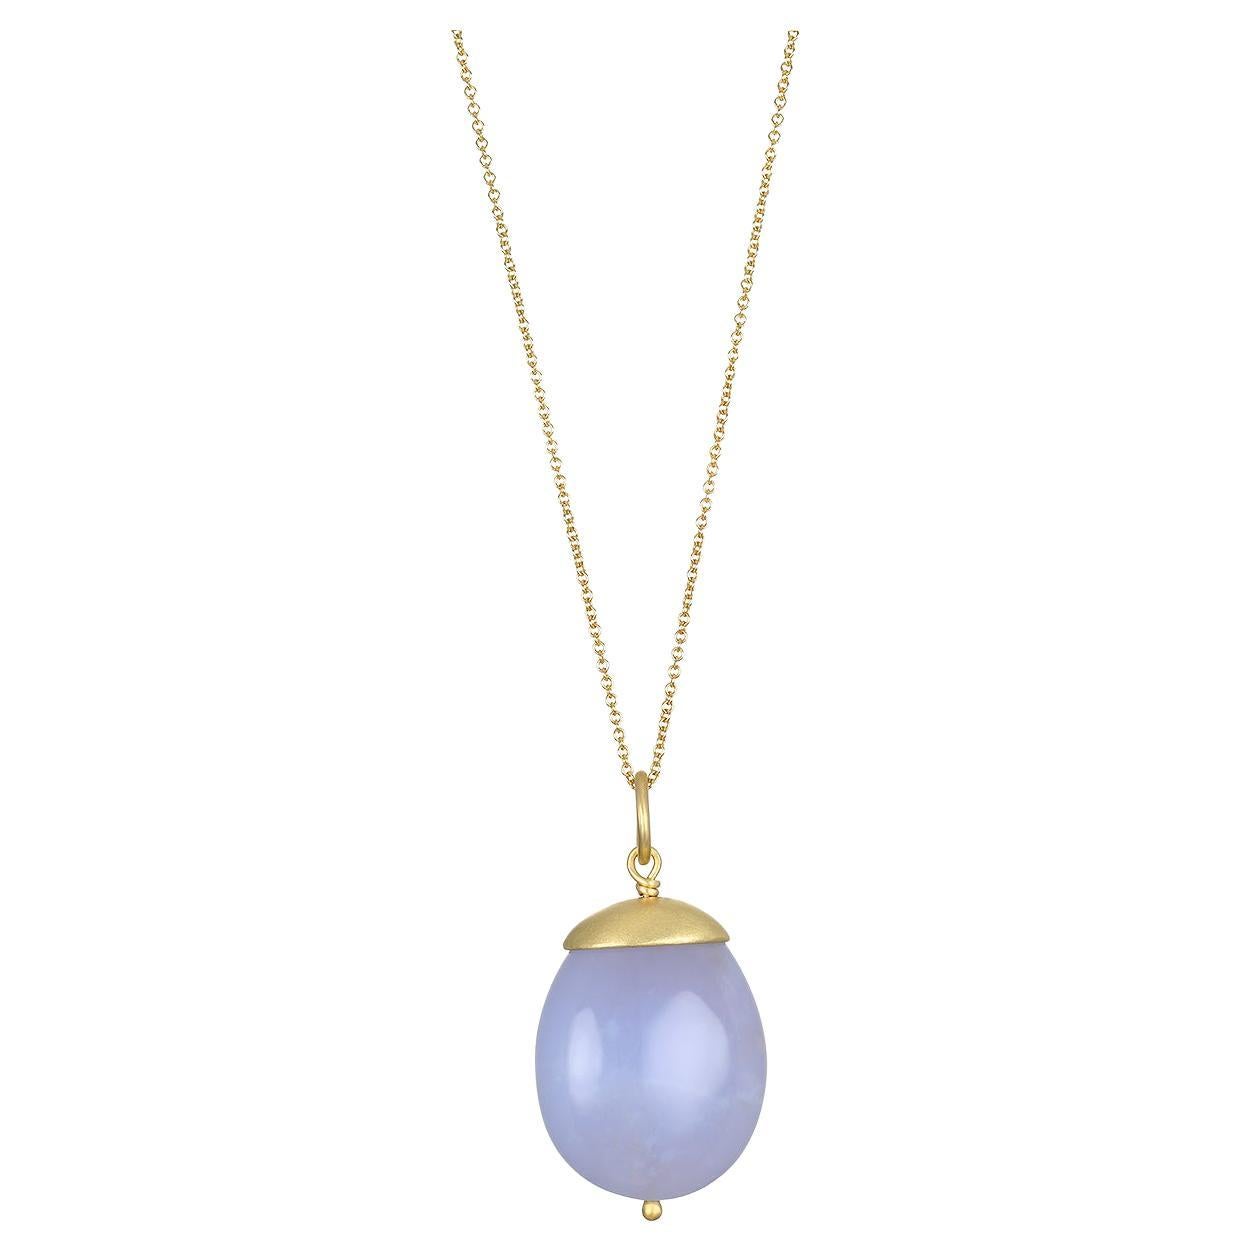 Faye Kim 18 Karat Gold Chalcedony Nugget Pendant with Cable Chain For Sale